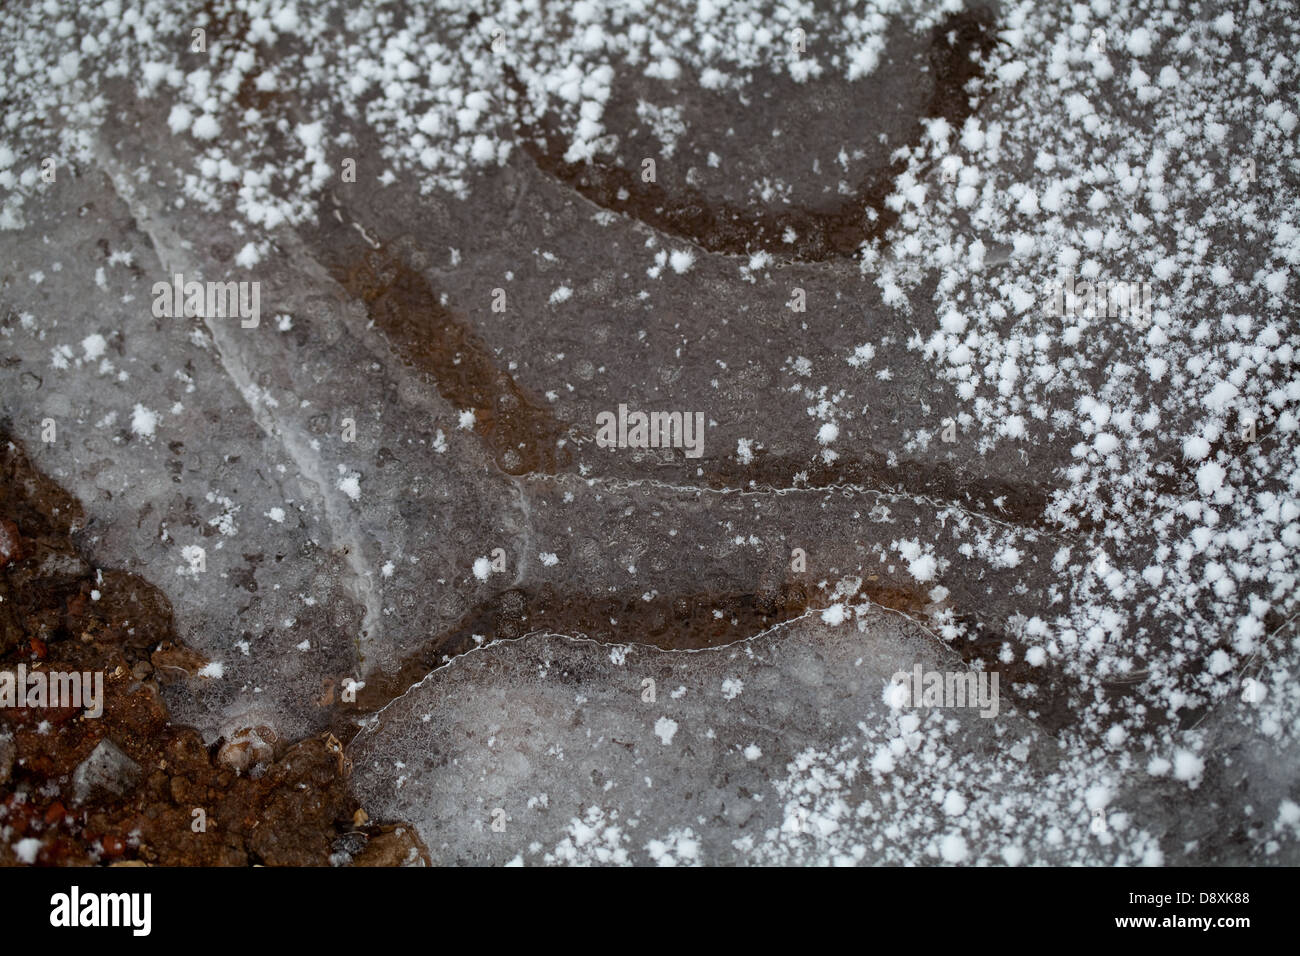 Frozen puddle on a rural track. Showing fallen hail stones on ground and on the ice surface. Stock Photo